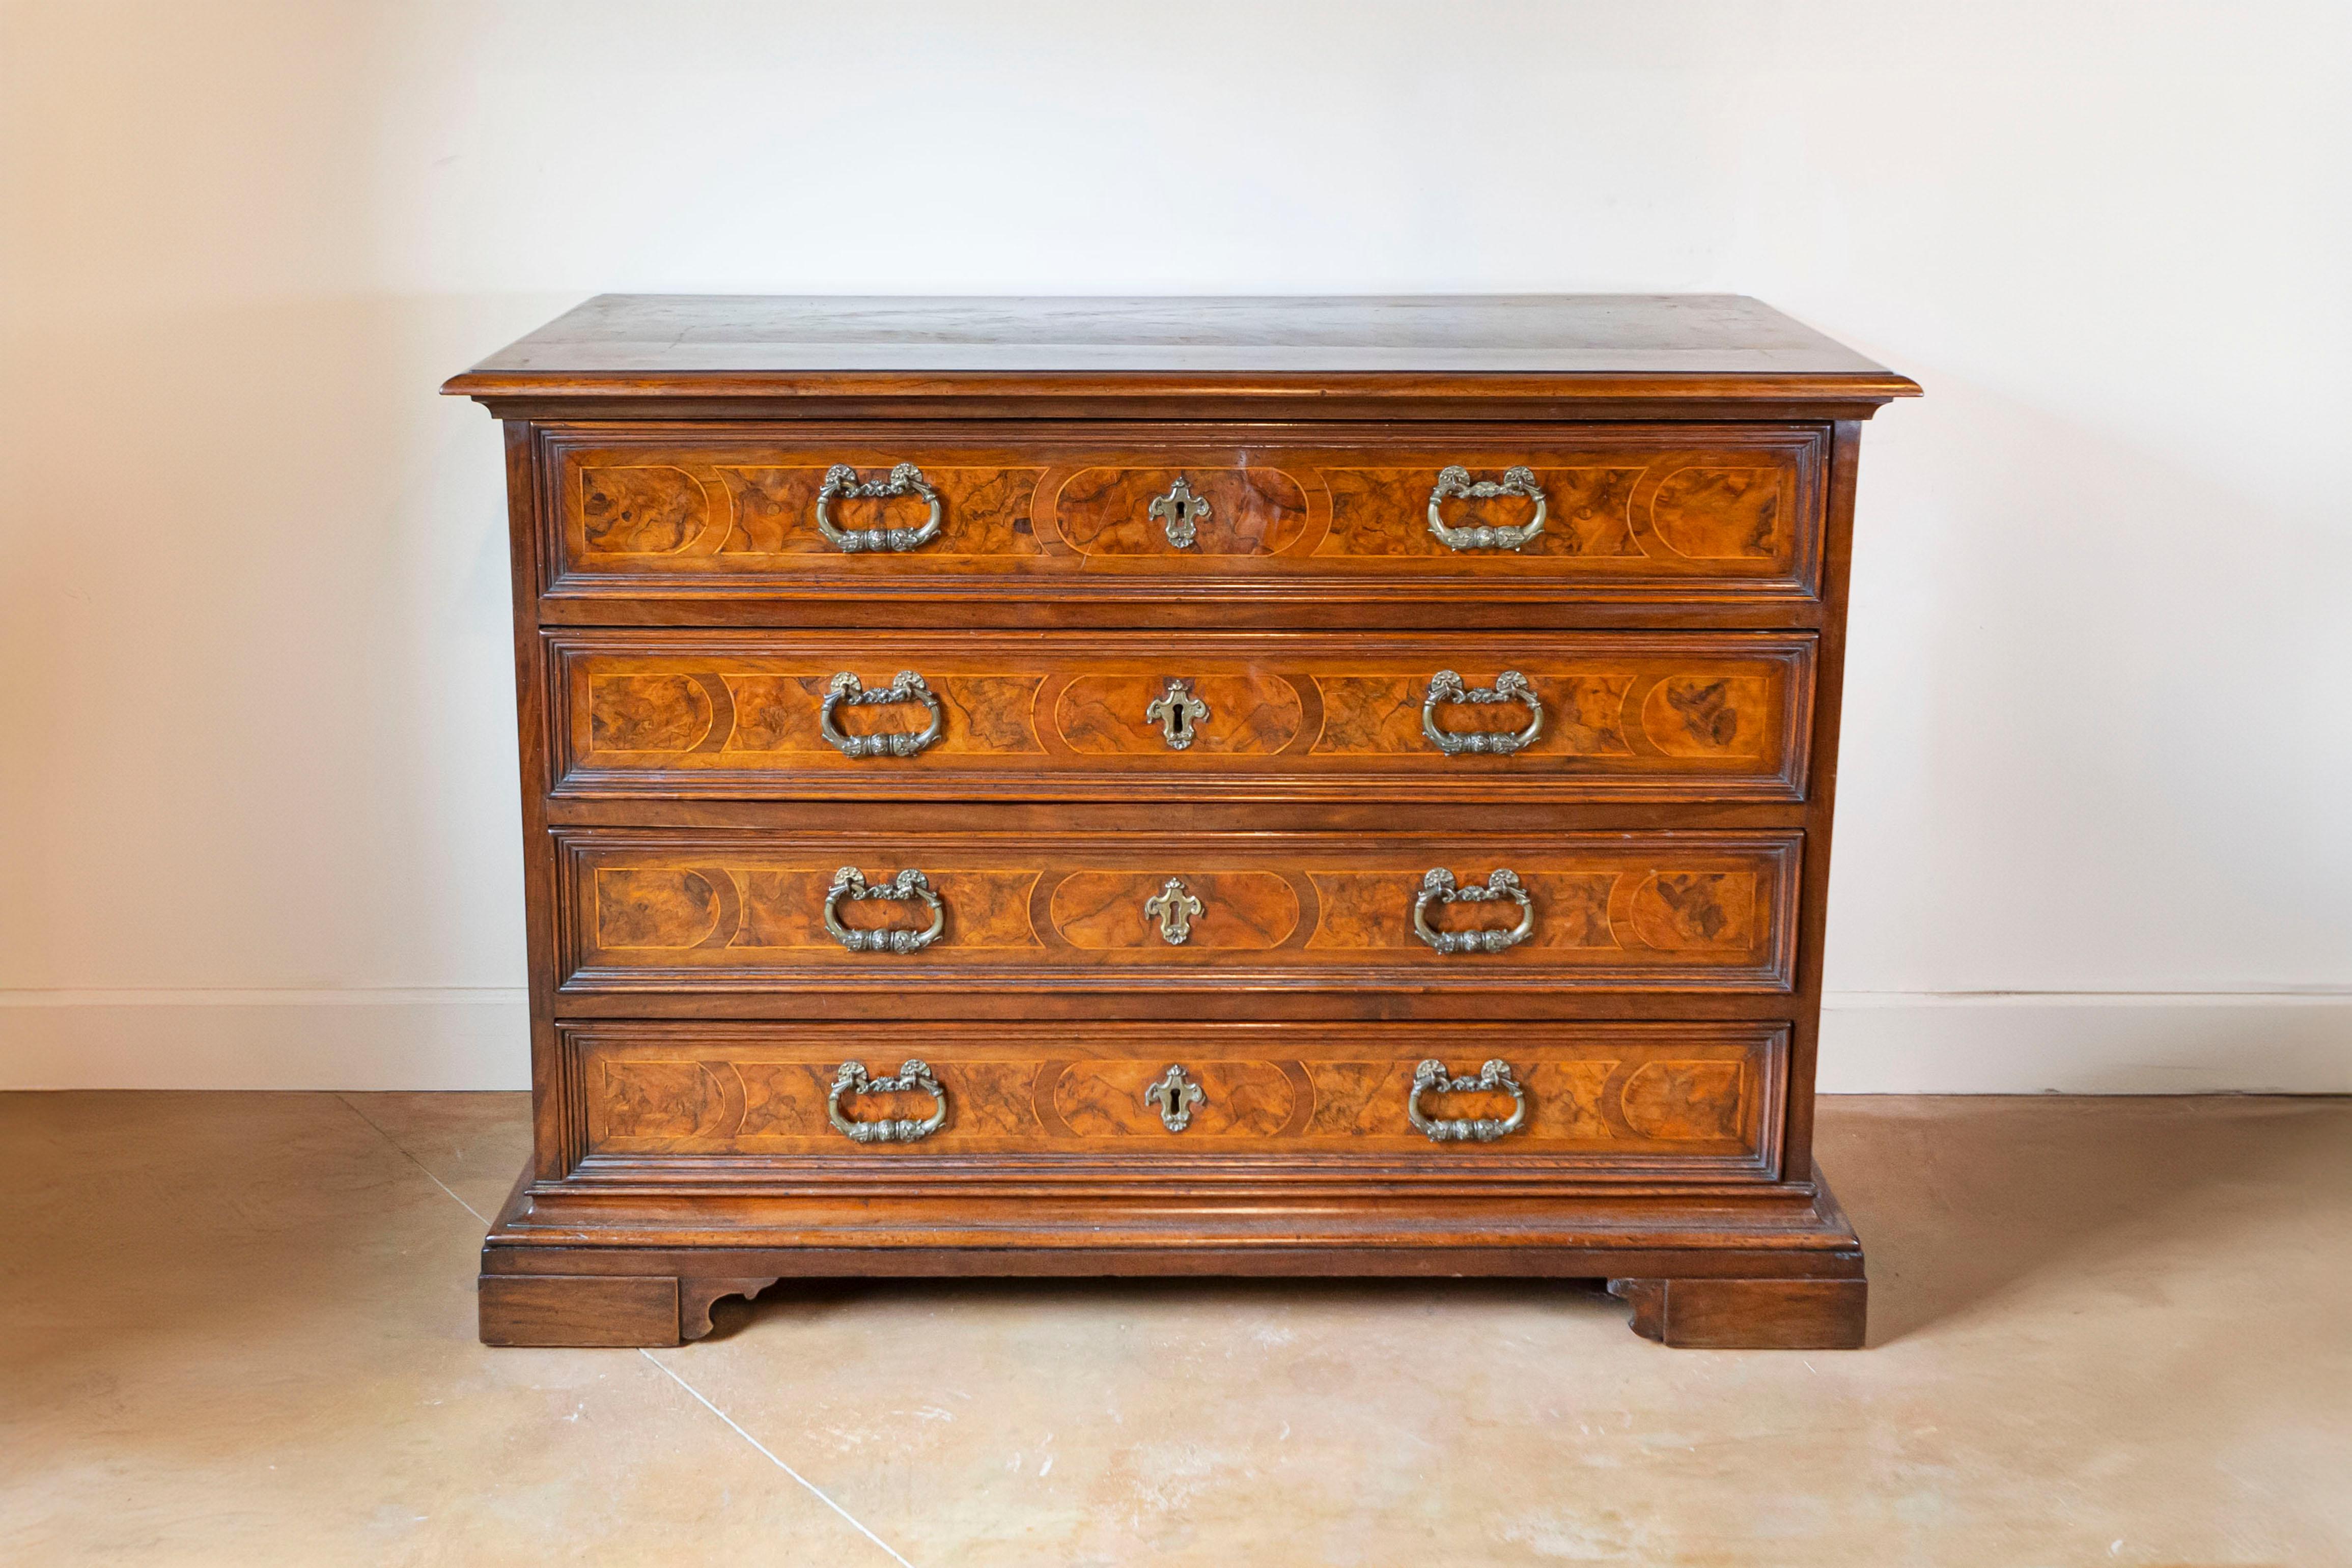 An Italian walnut commode from the 18th century with four drawers and carved bracket feet. Unveil an opulent slice of 18th-century Italy in your home with this spellbinding Italian walnut commode. Exuding an air of timeless grandeur, this